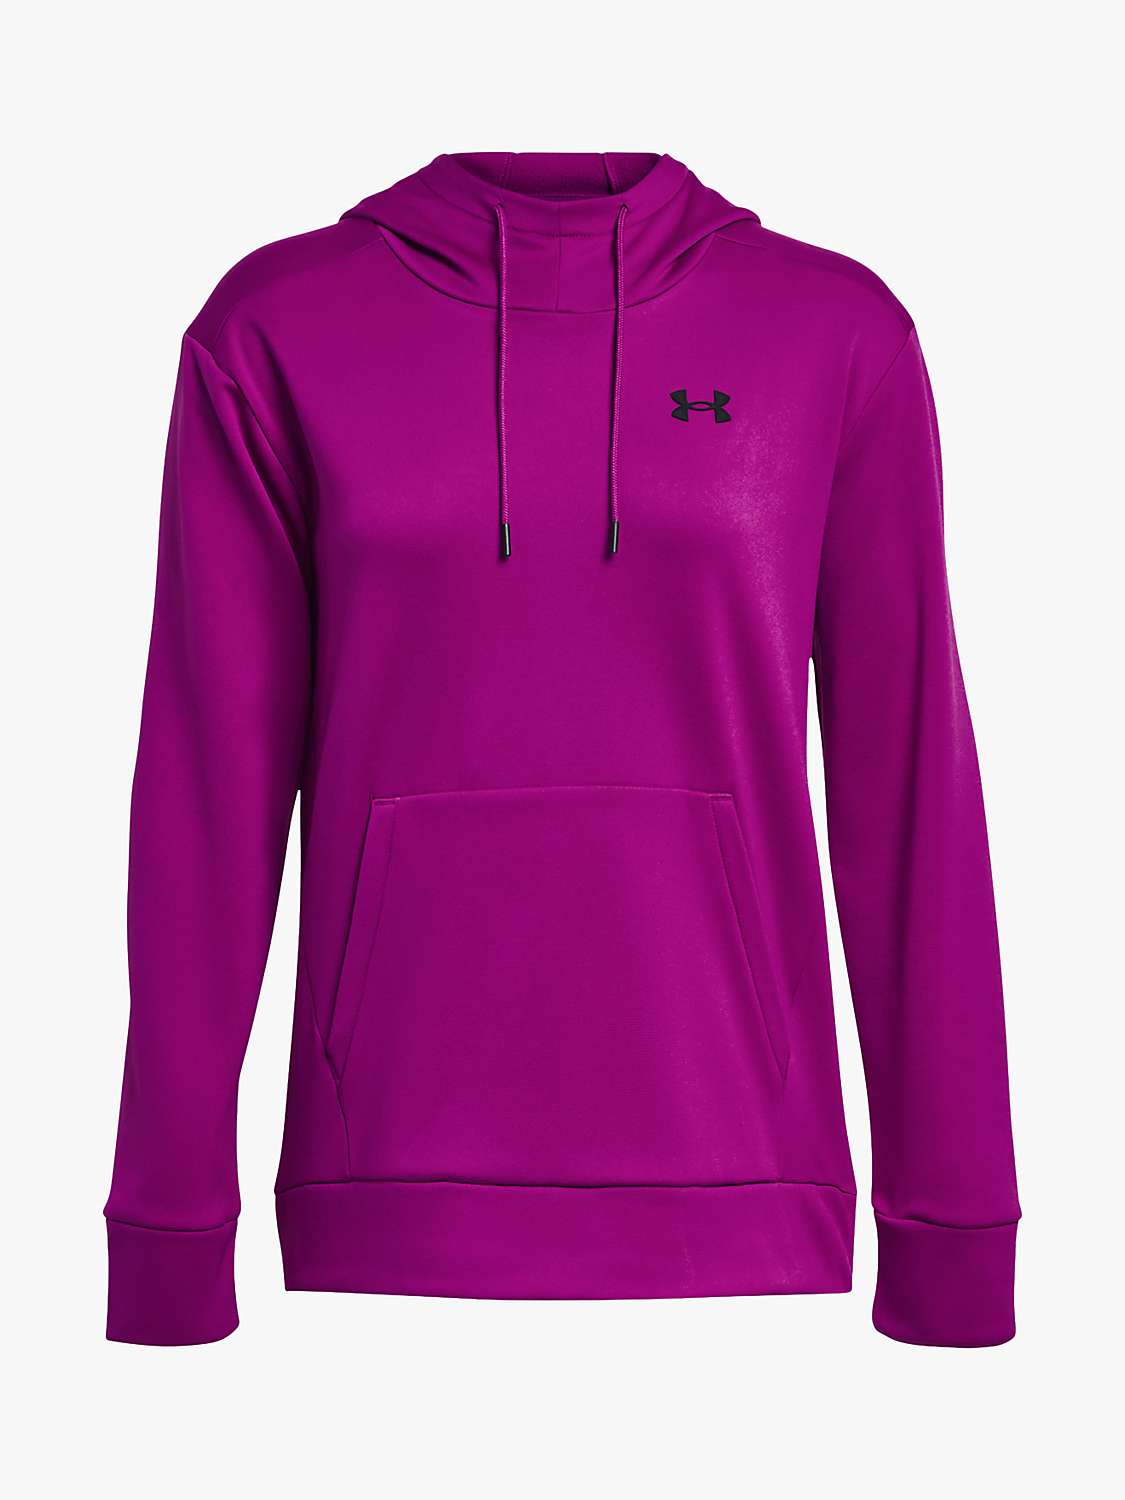 Buy Under Armour Armour Fleece® Left Chest Hoodie Online at johnlewis.com